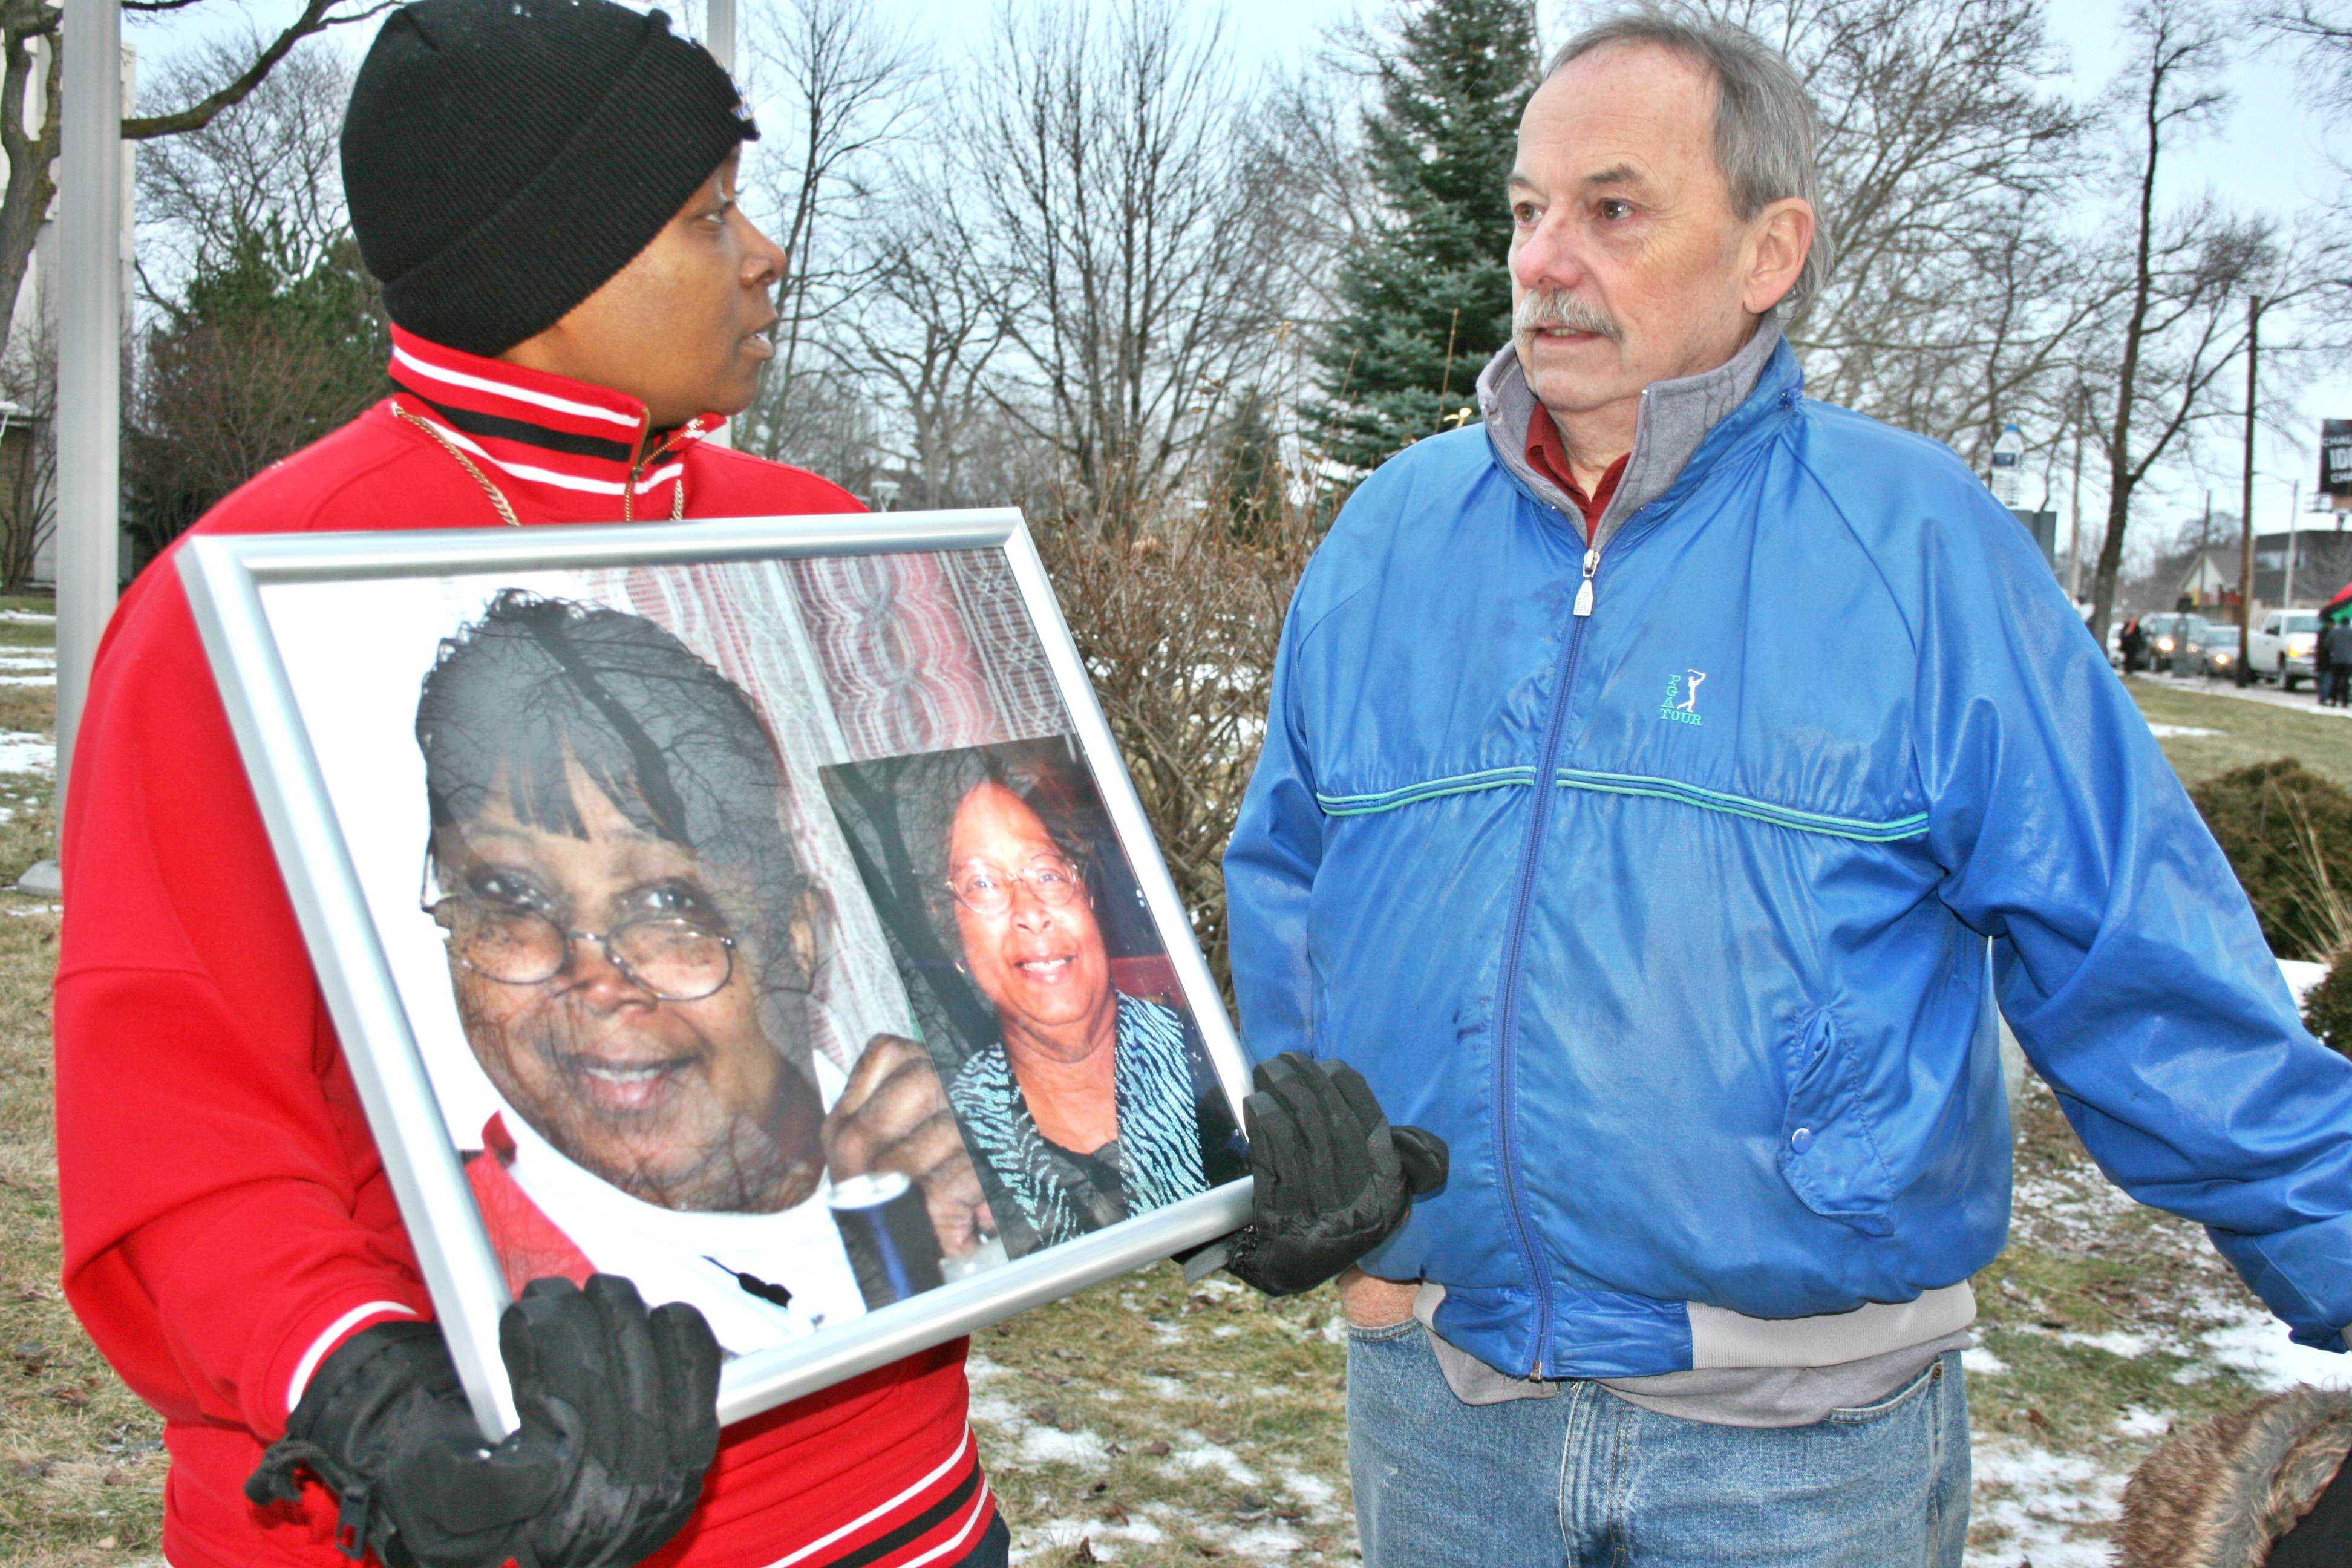 Holding a picture of her mother, Ms. Scholyanda Brown tells a man the story of her mother's death due to Legionnaire's disease at a Flint clean water protest outside Flint City Hall on Saturday, Jan. 16.